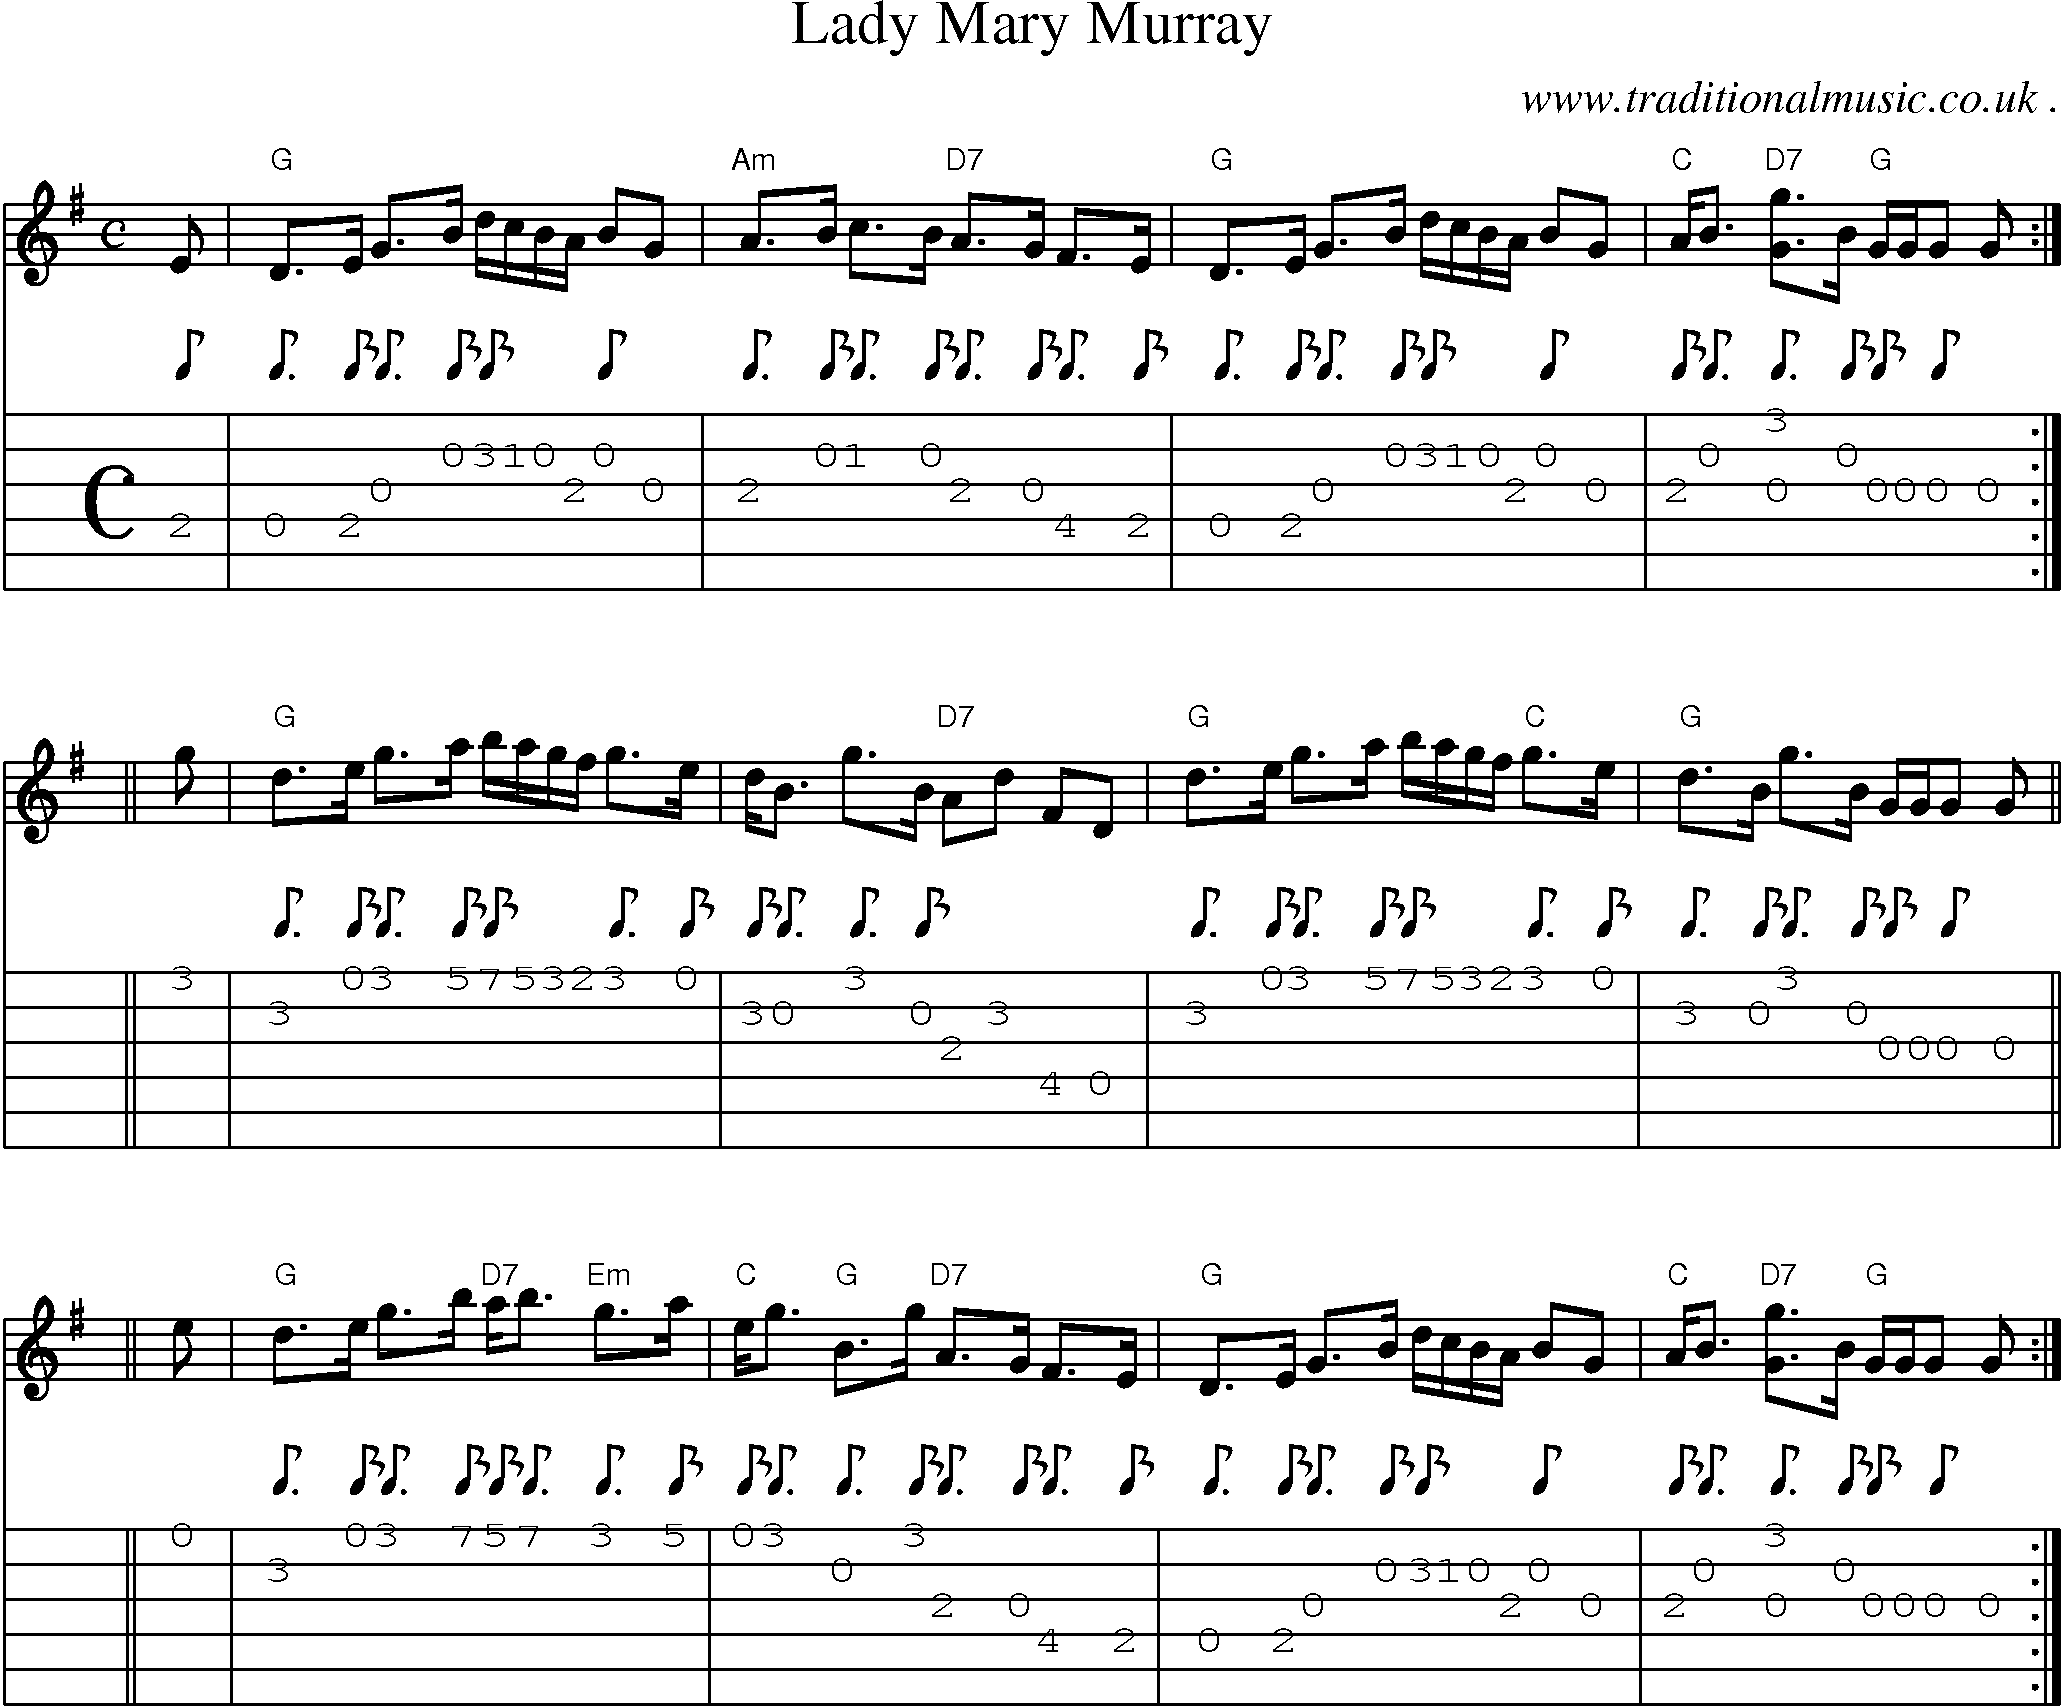 Sheet-music  score, Chords and Guitar Tabs for Lady Mary Murray